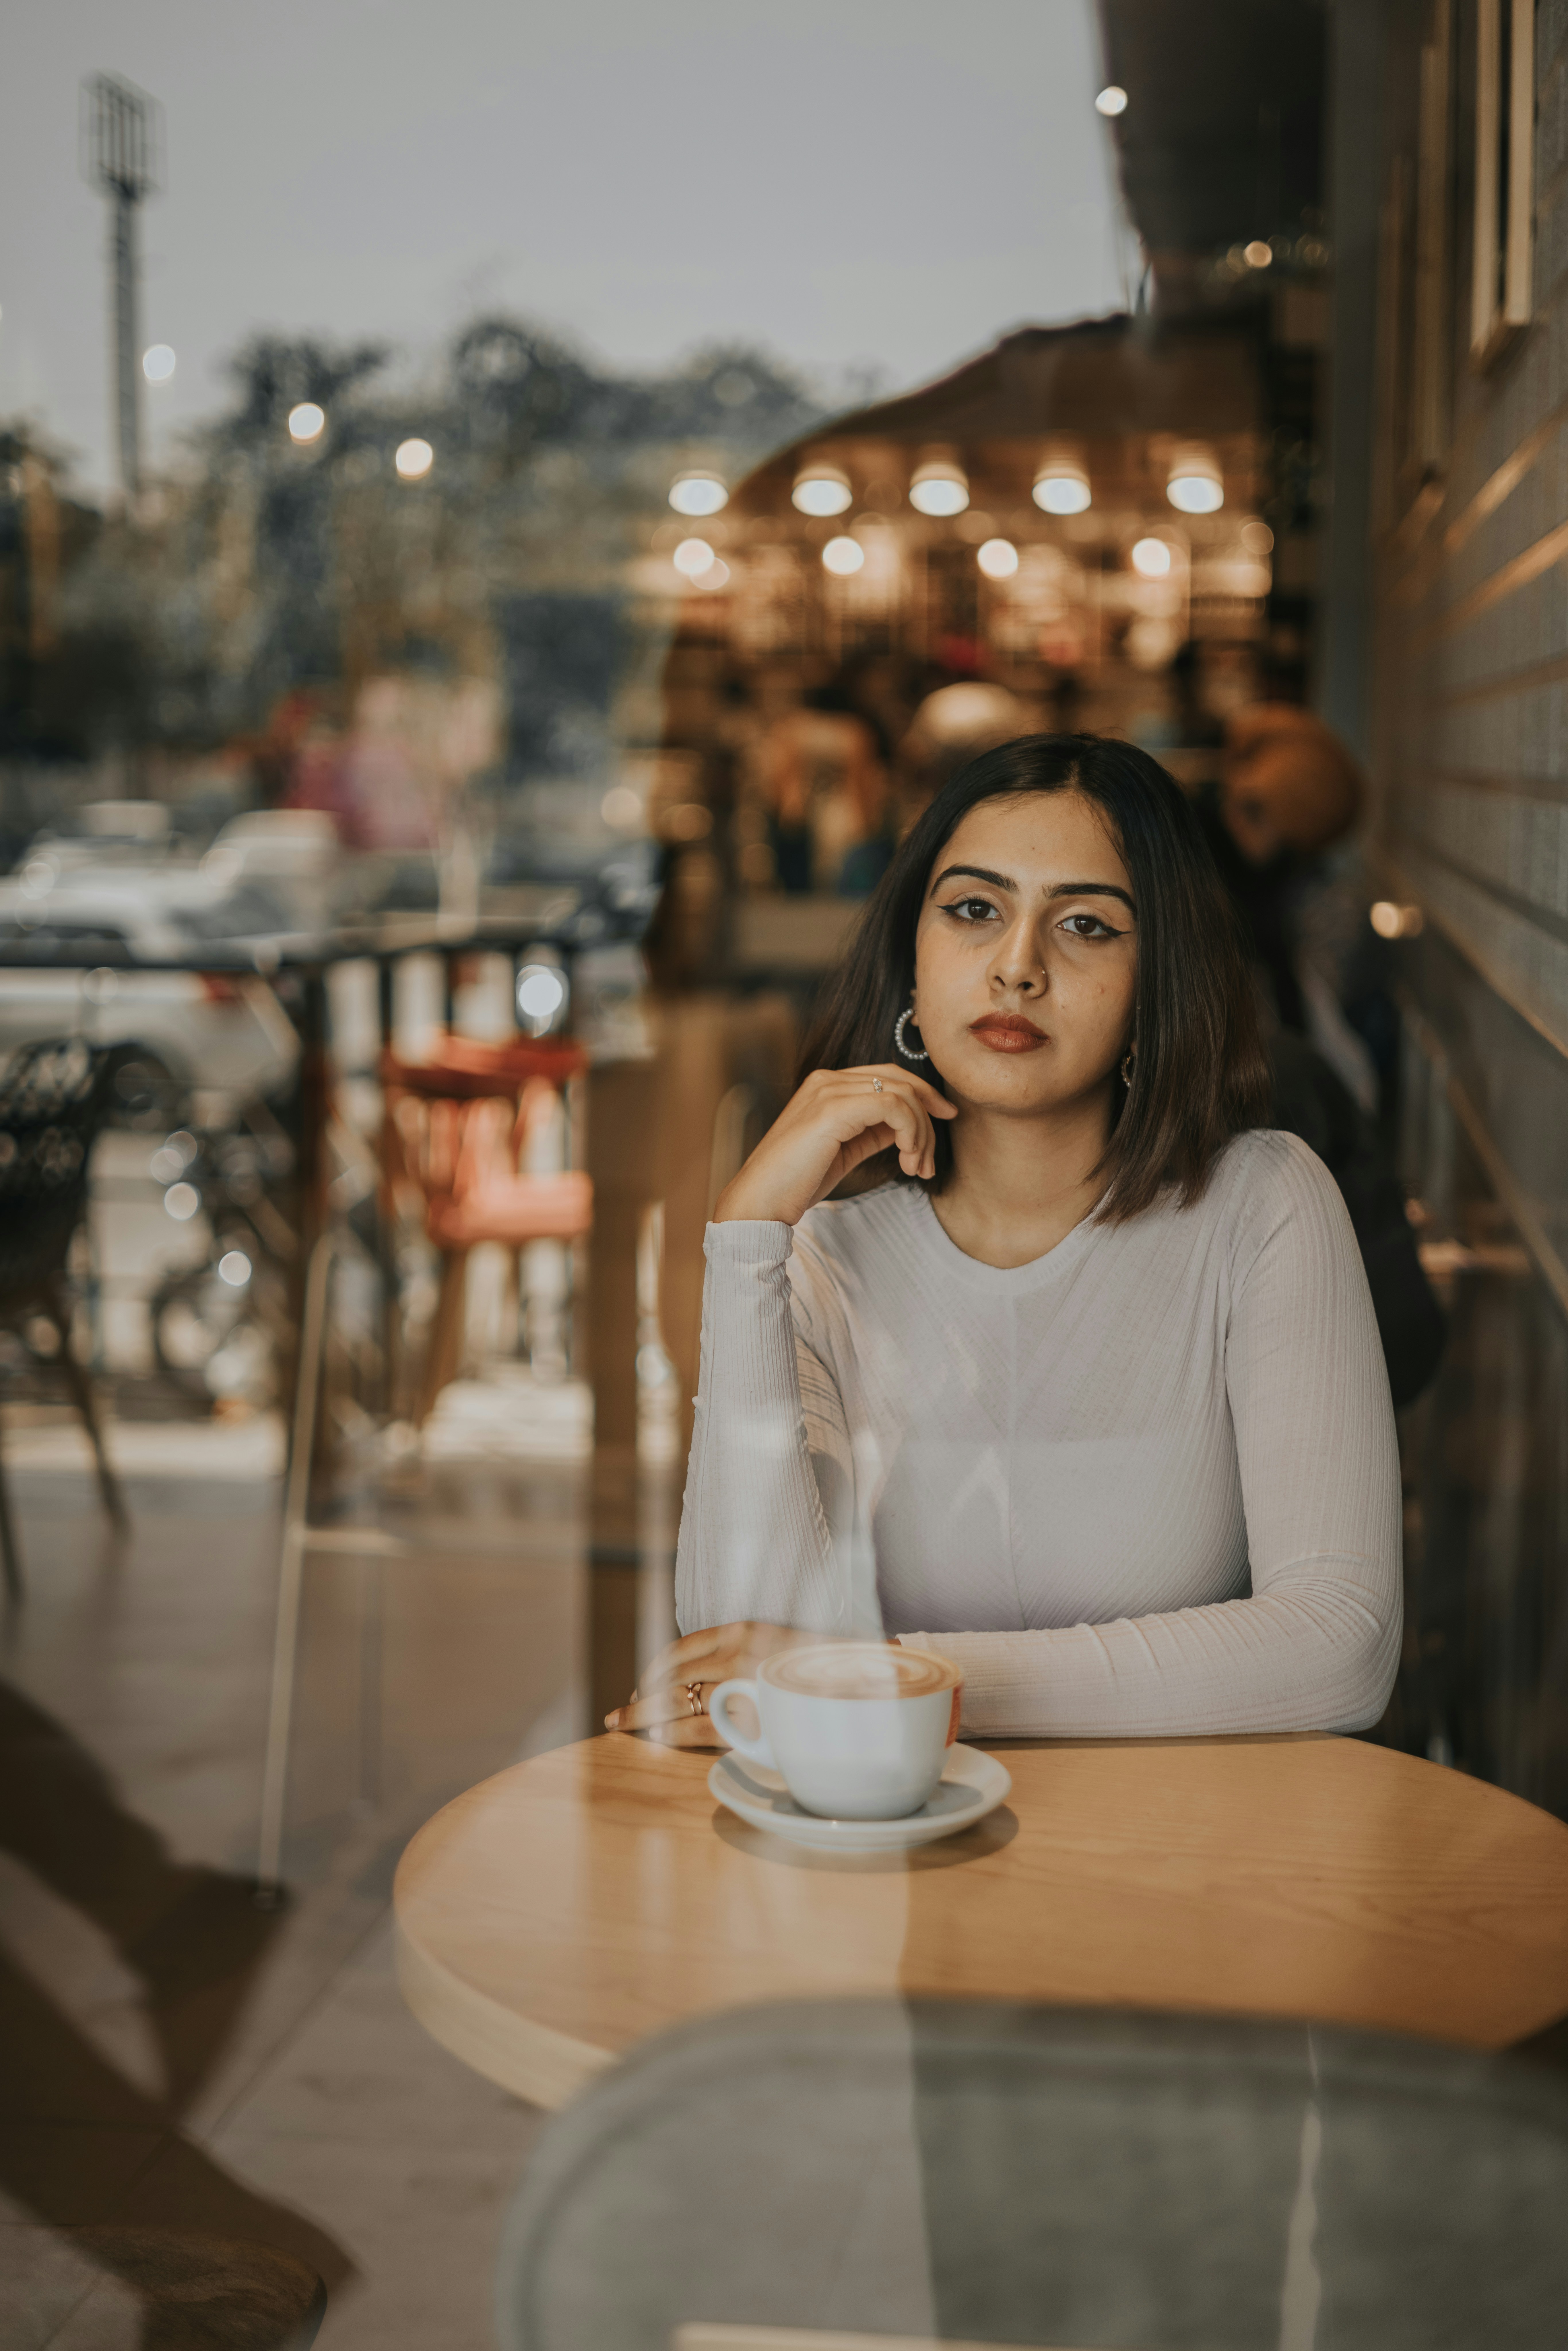 A young girl at a cafe | Source: Unsplash